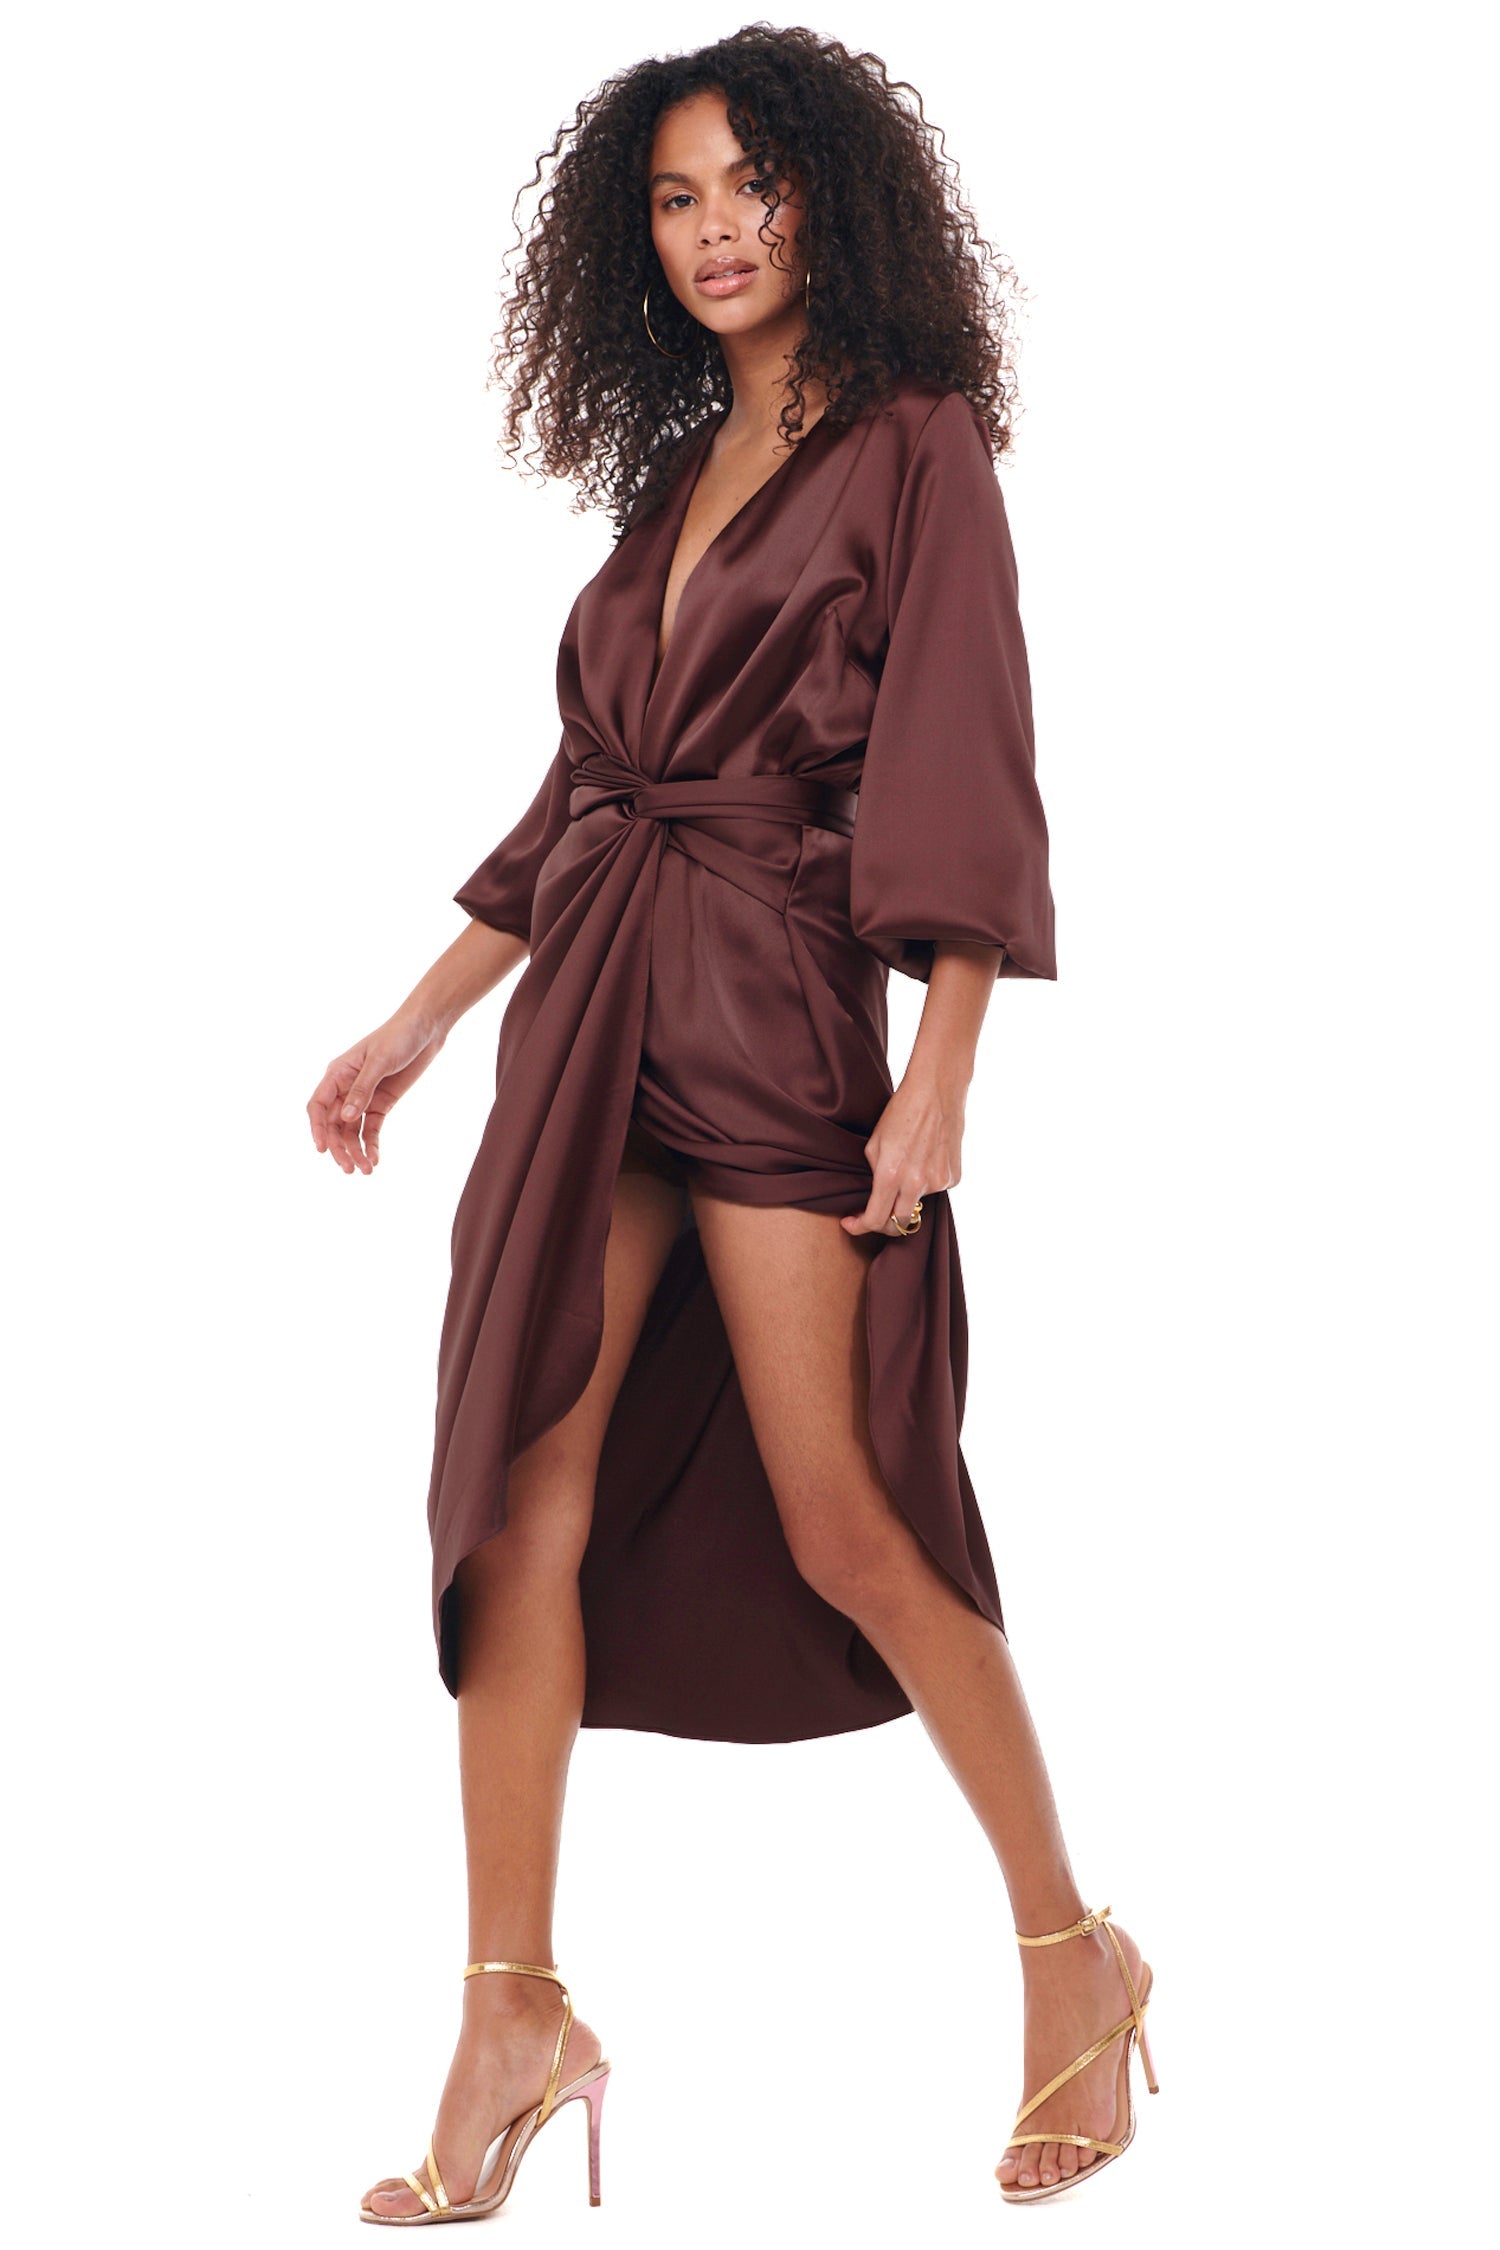 Model wearing Coco Wrap Dress standing facing the camera